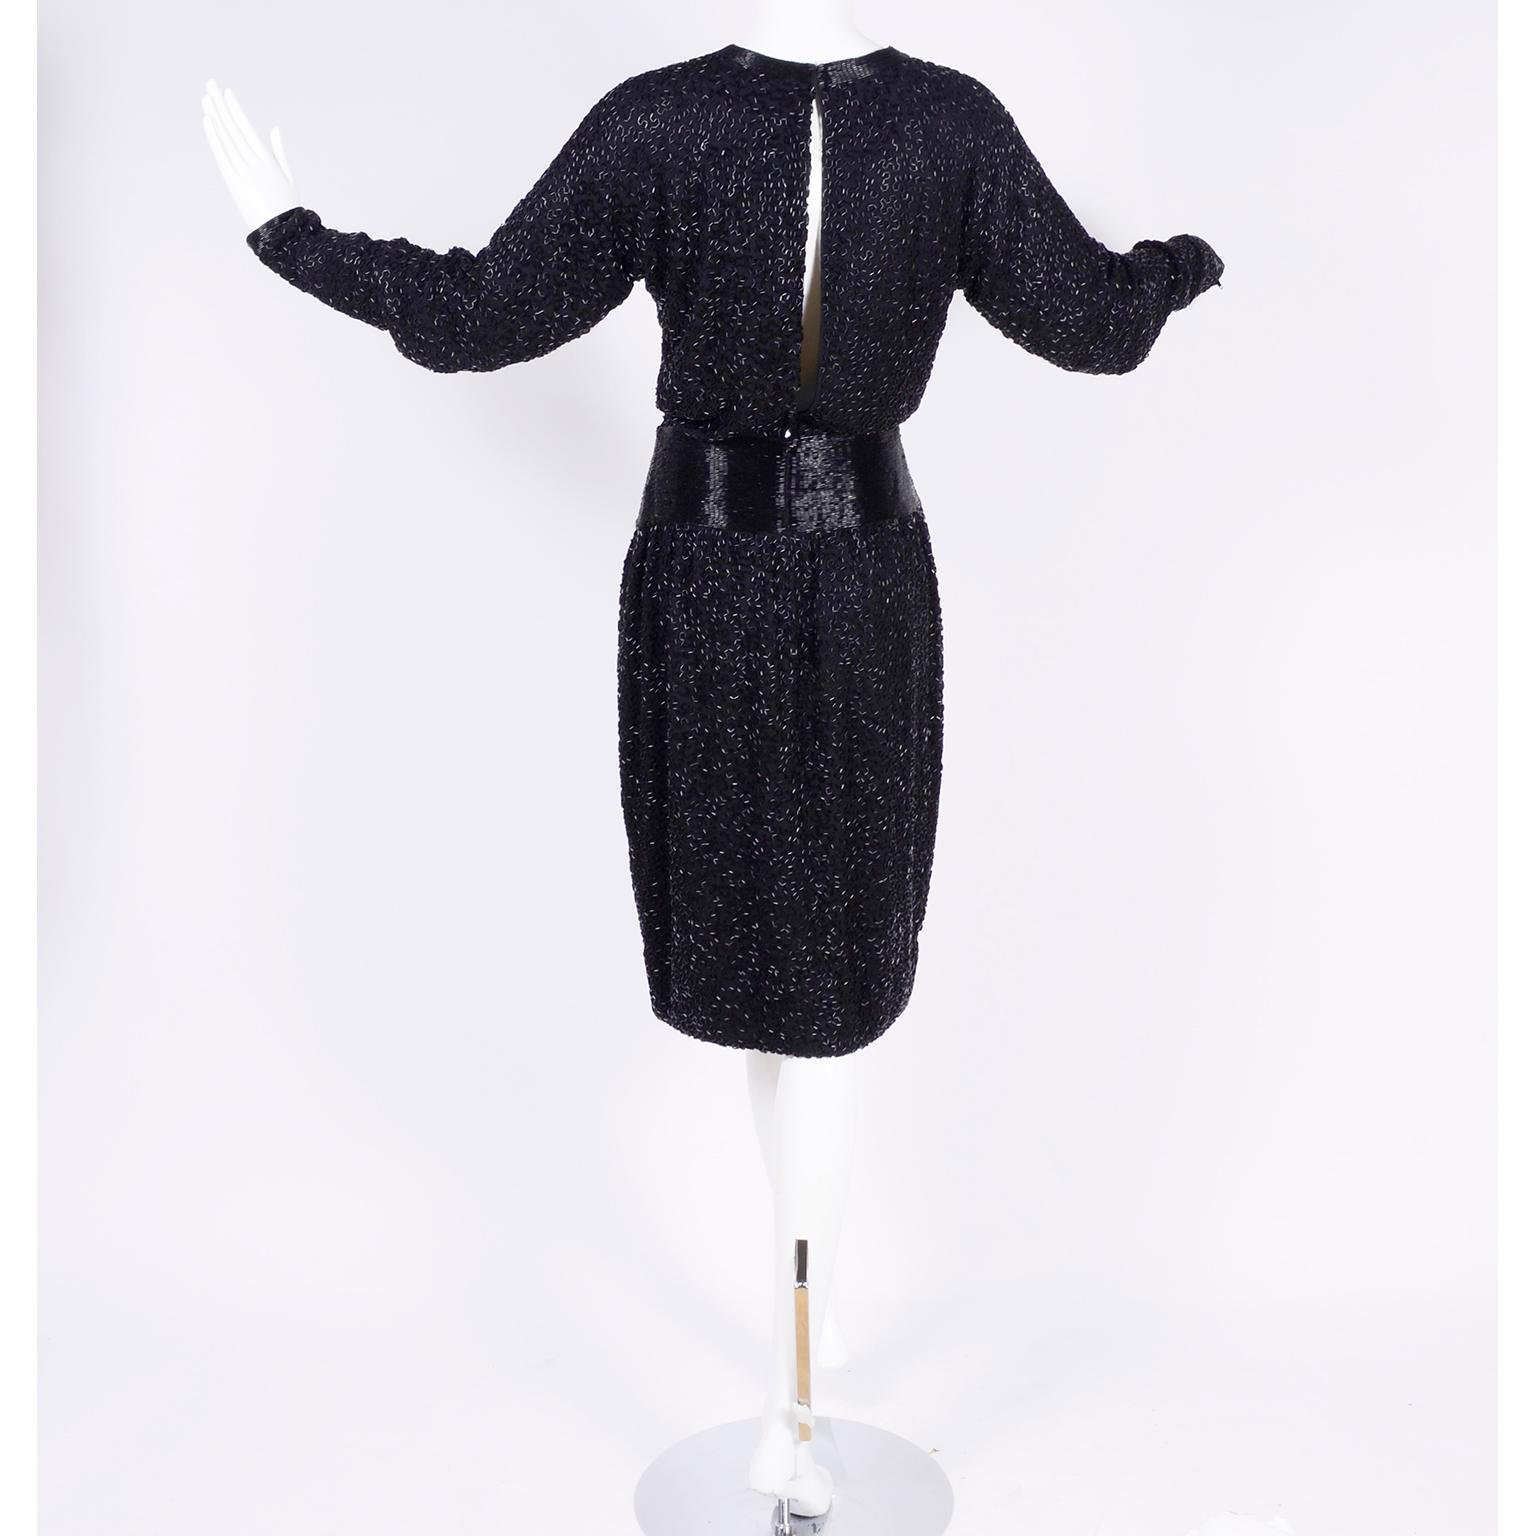 1980s Stephen Yearick Black Dress Heavily Beaded Silk With Open Back Drape In Excellent Condition For Sale In Portland, OR